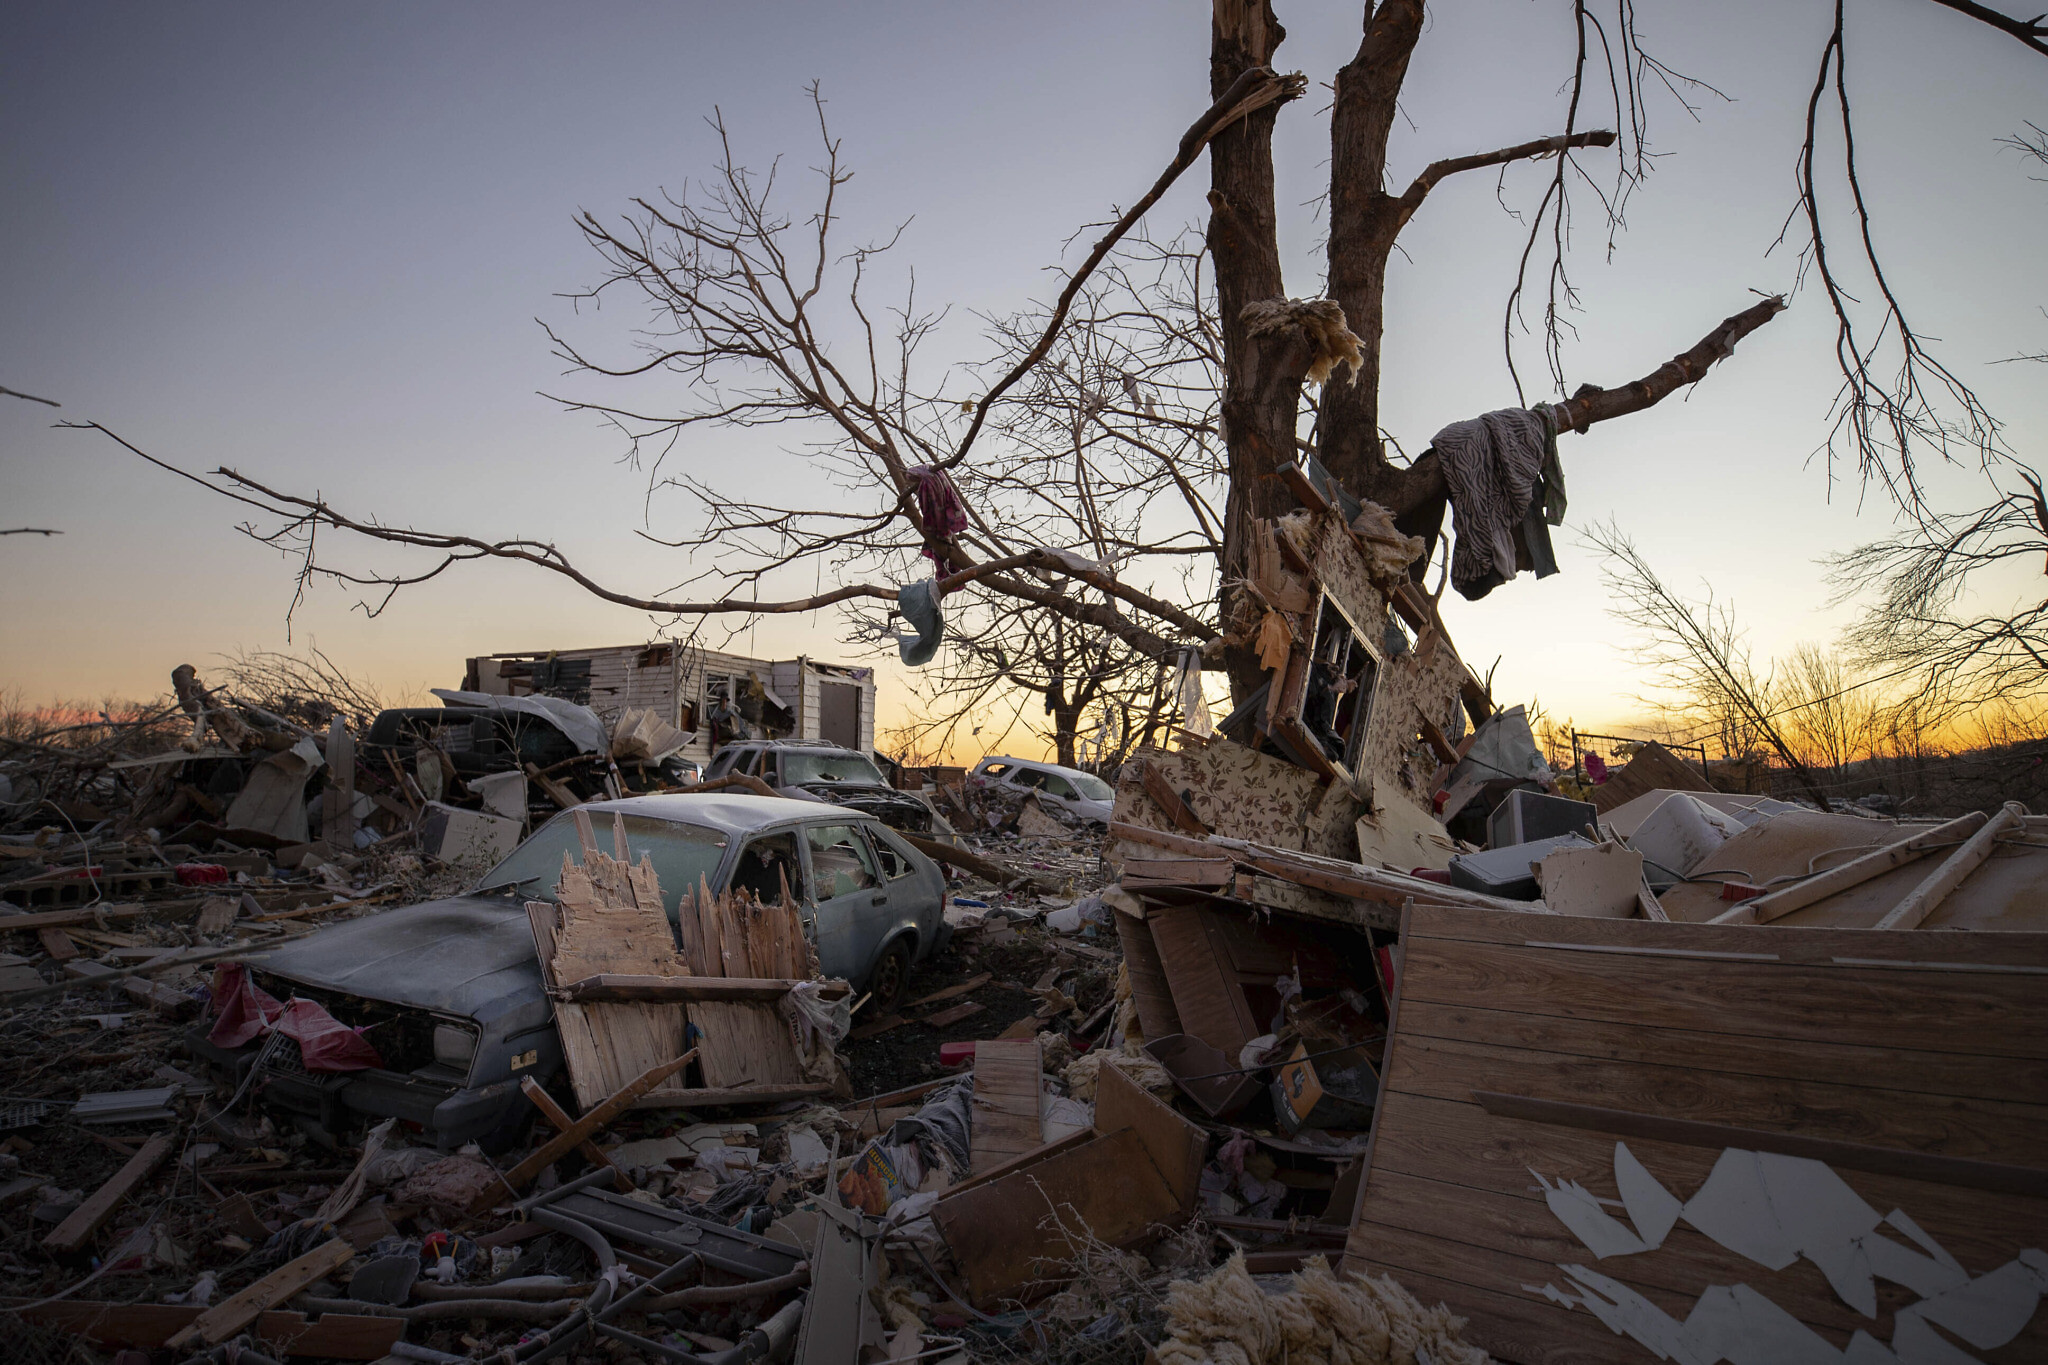 Over 100 feared dead after tornado outbreak devastates US states The